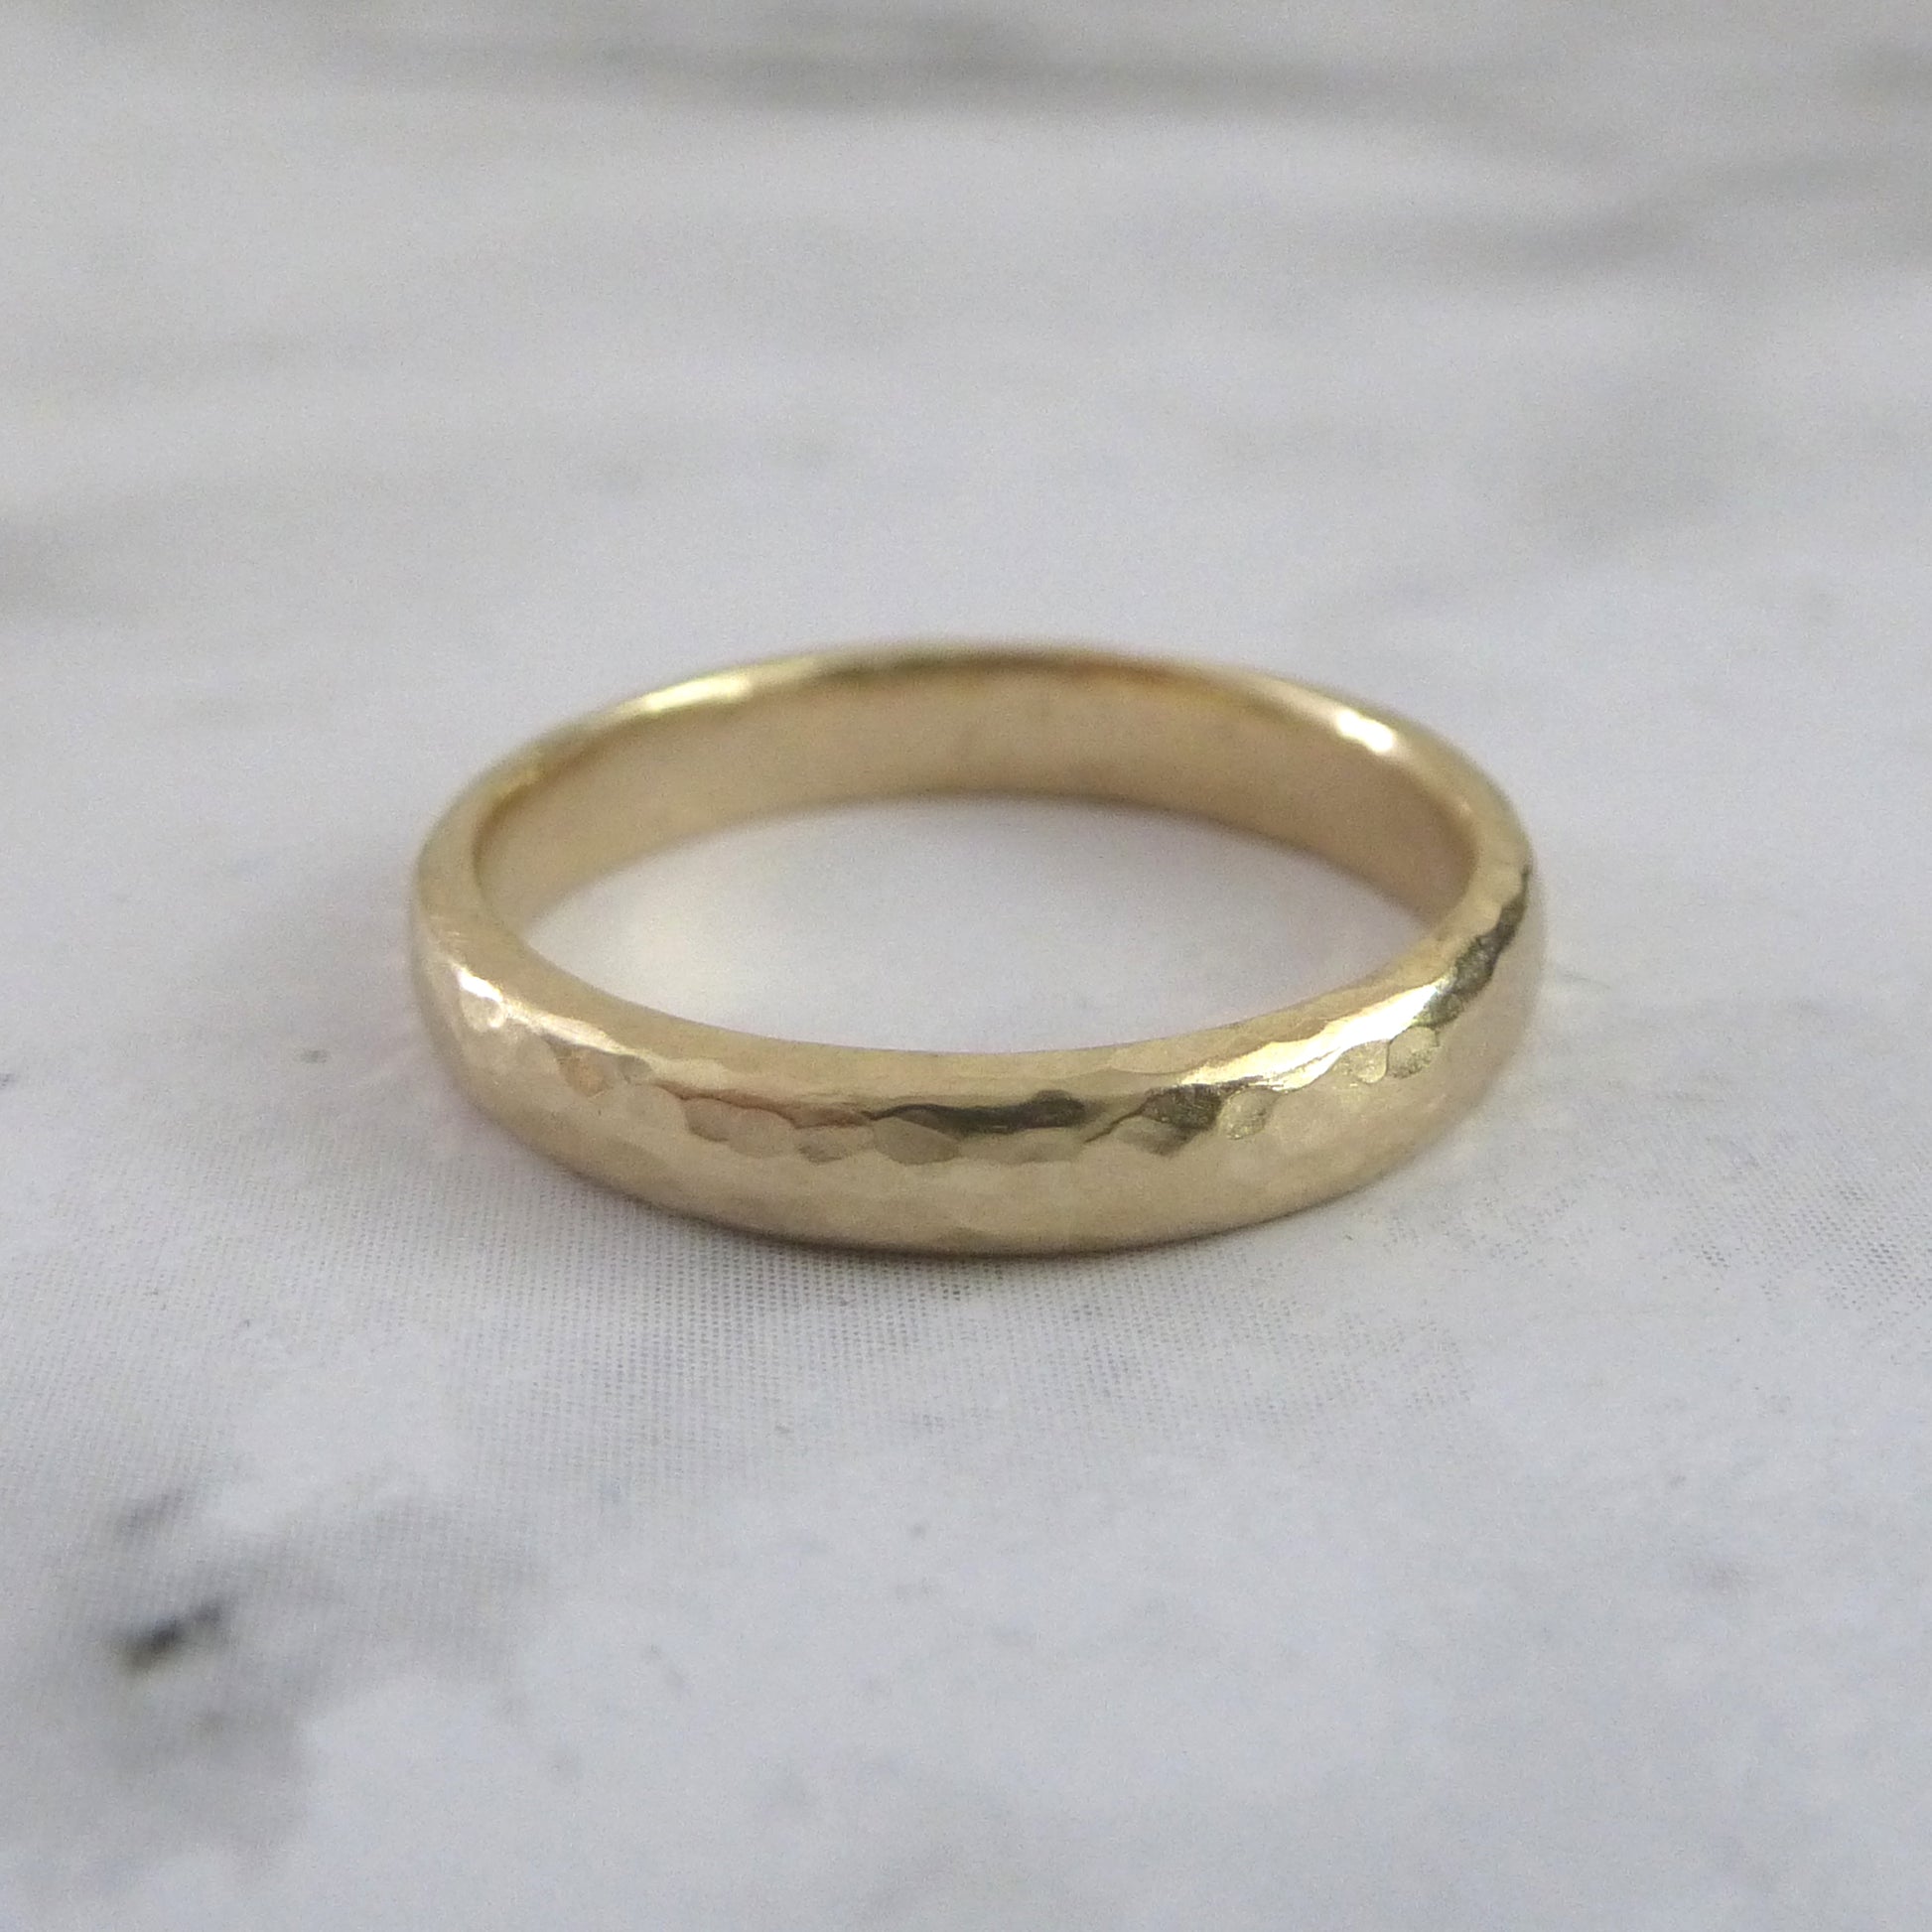 3mm band in hammered 9ct yellow gold, recycled gold wedding band